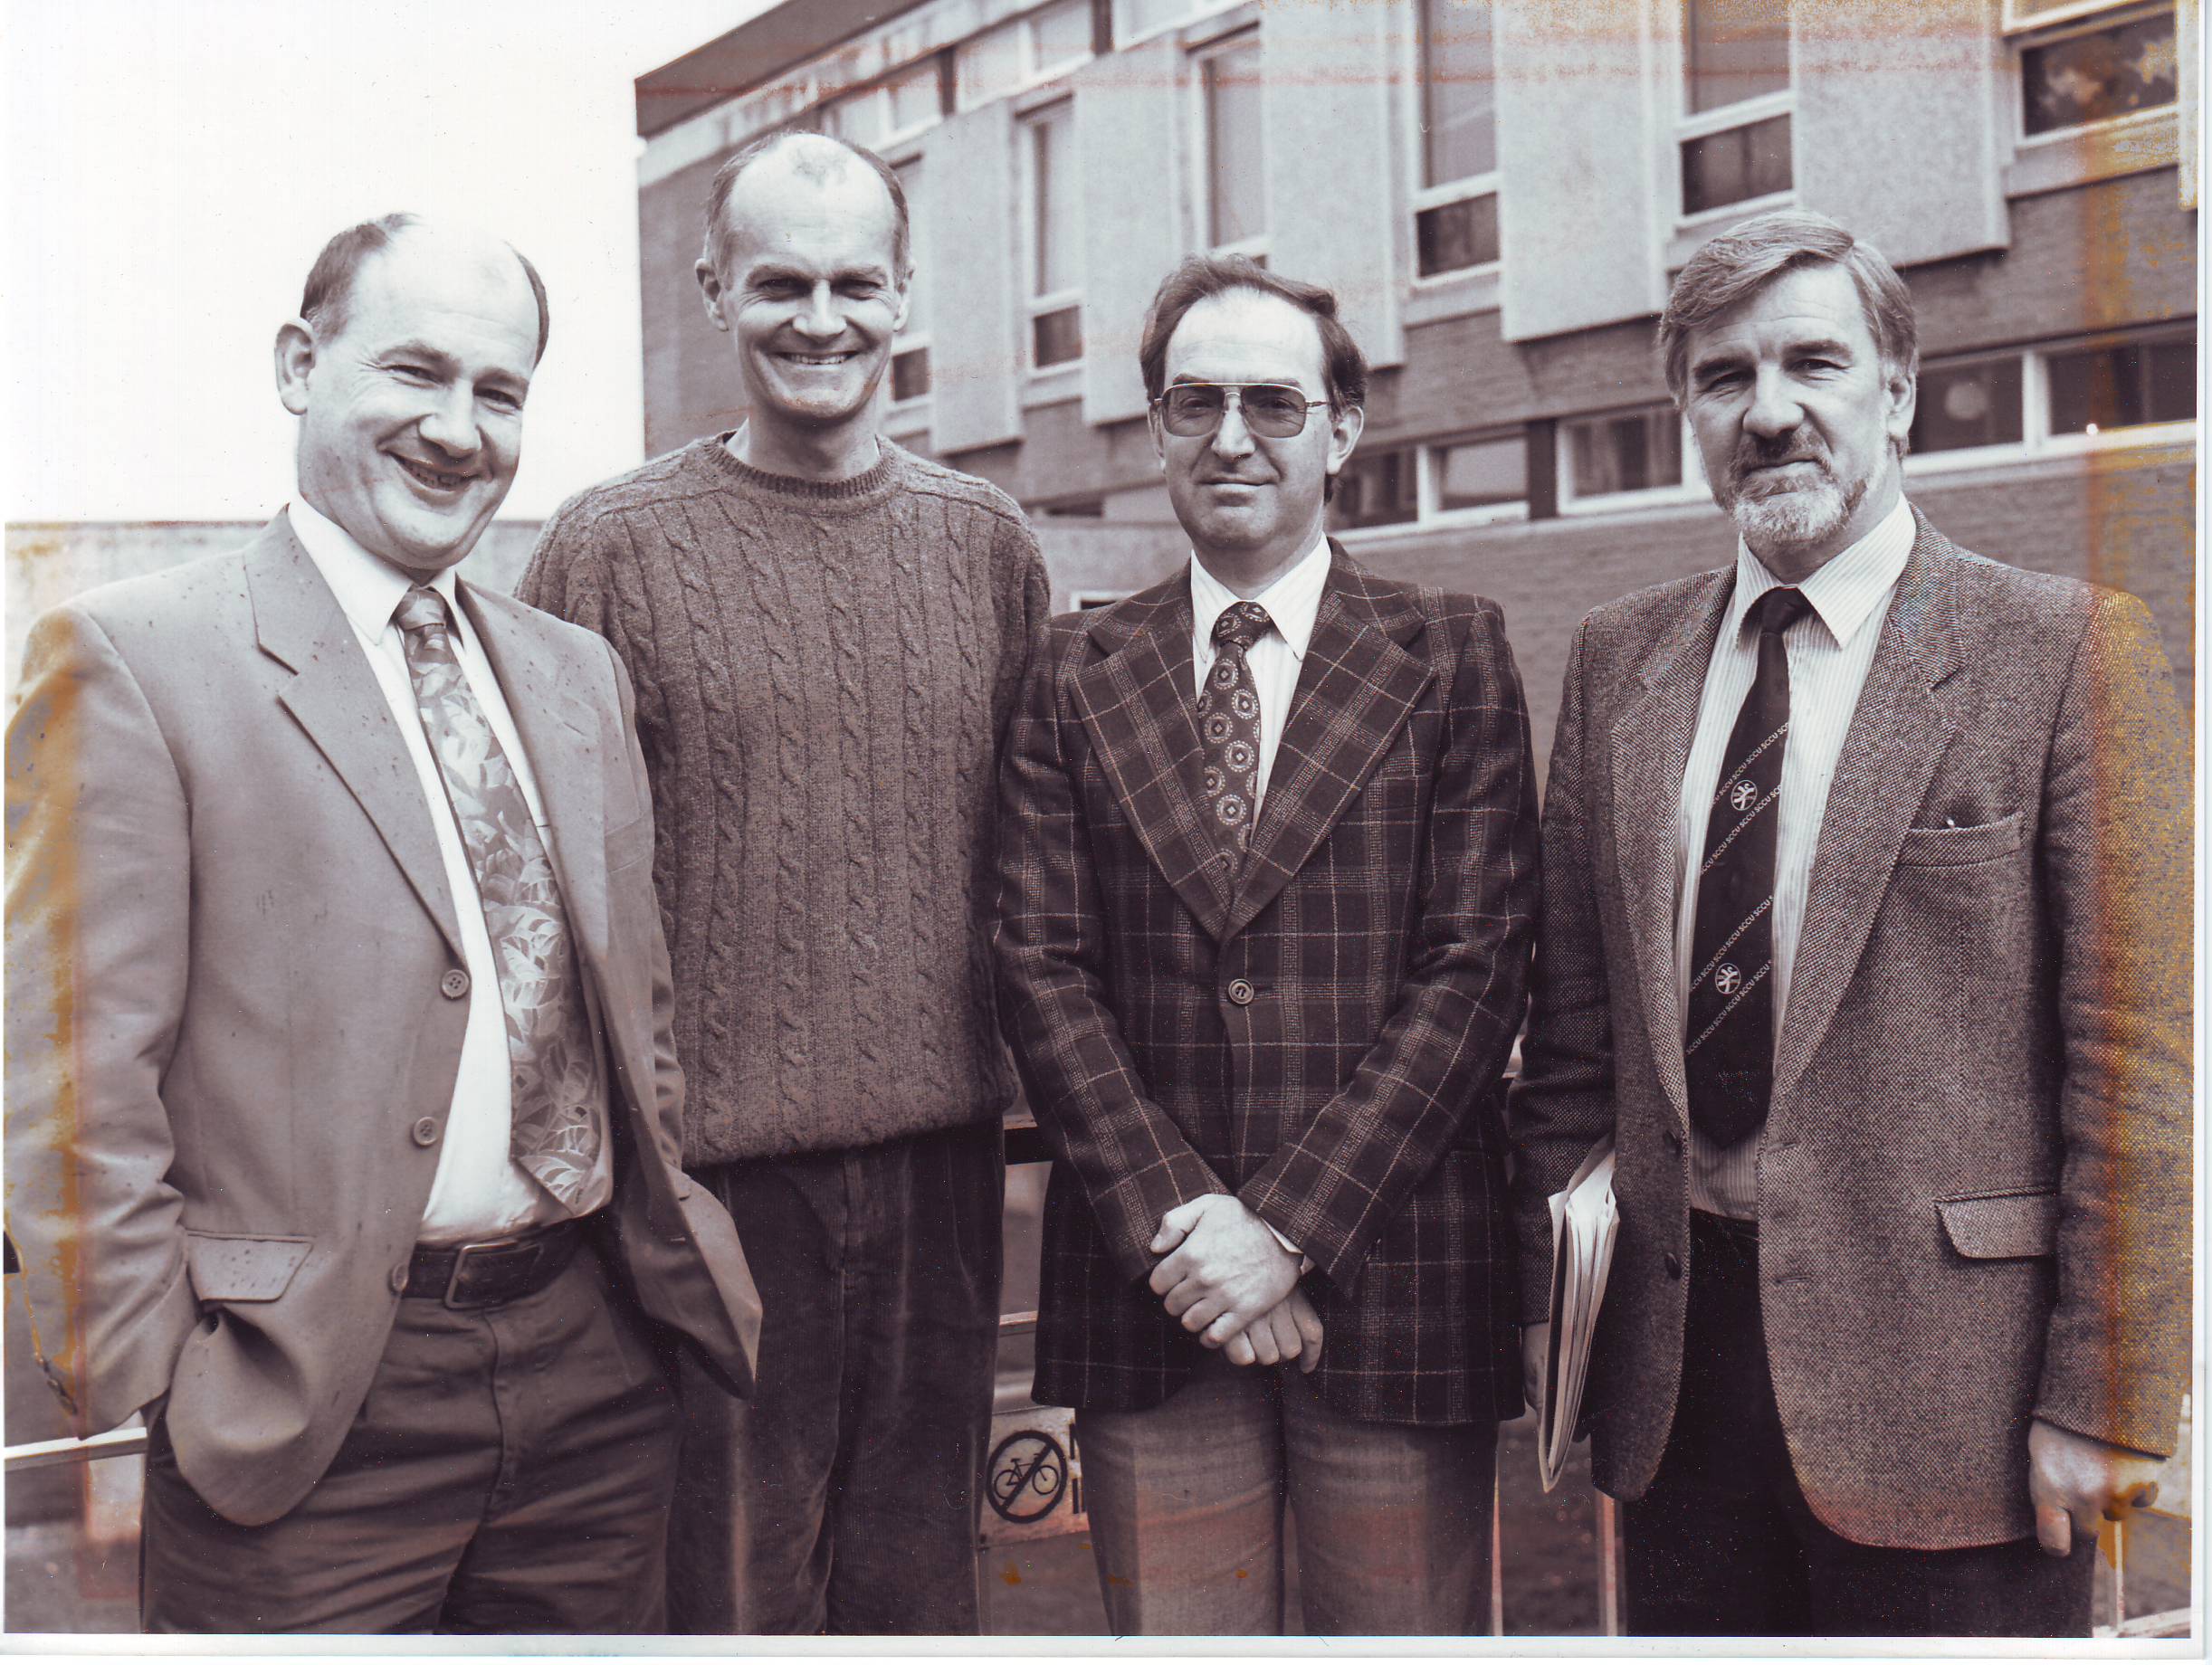 Peter Ross, Mike Livesey, Colin Reeves, Ron Morrison